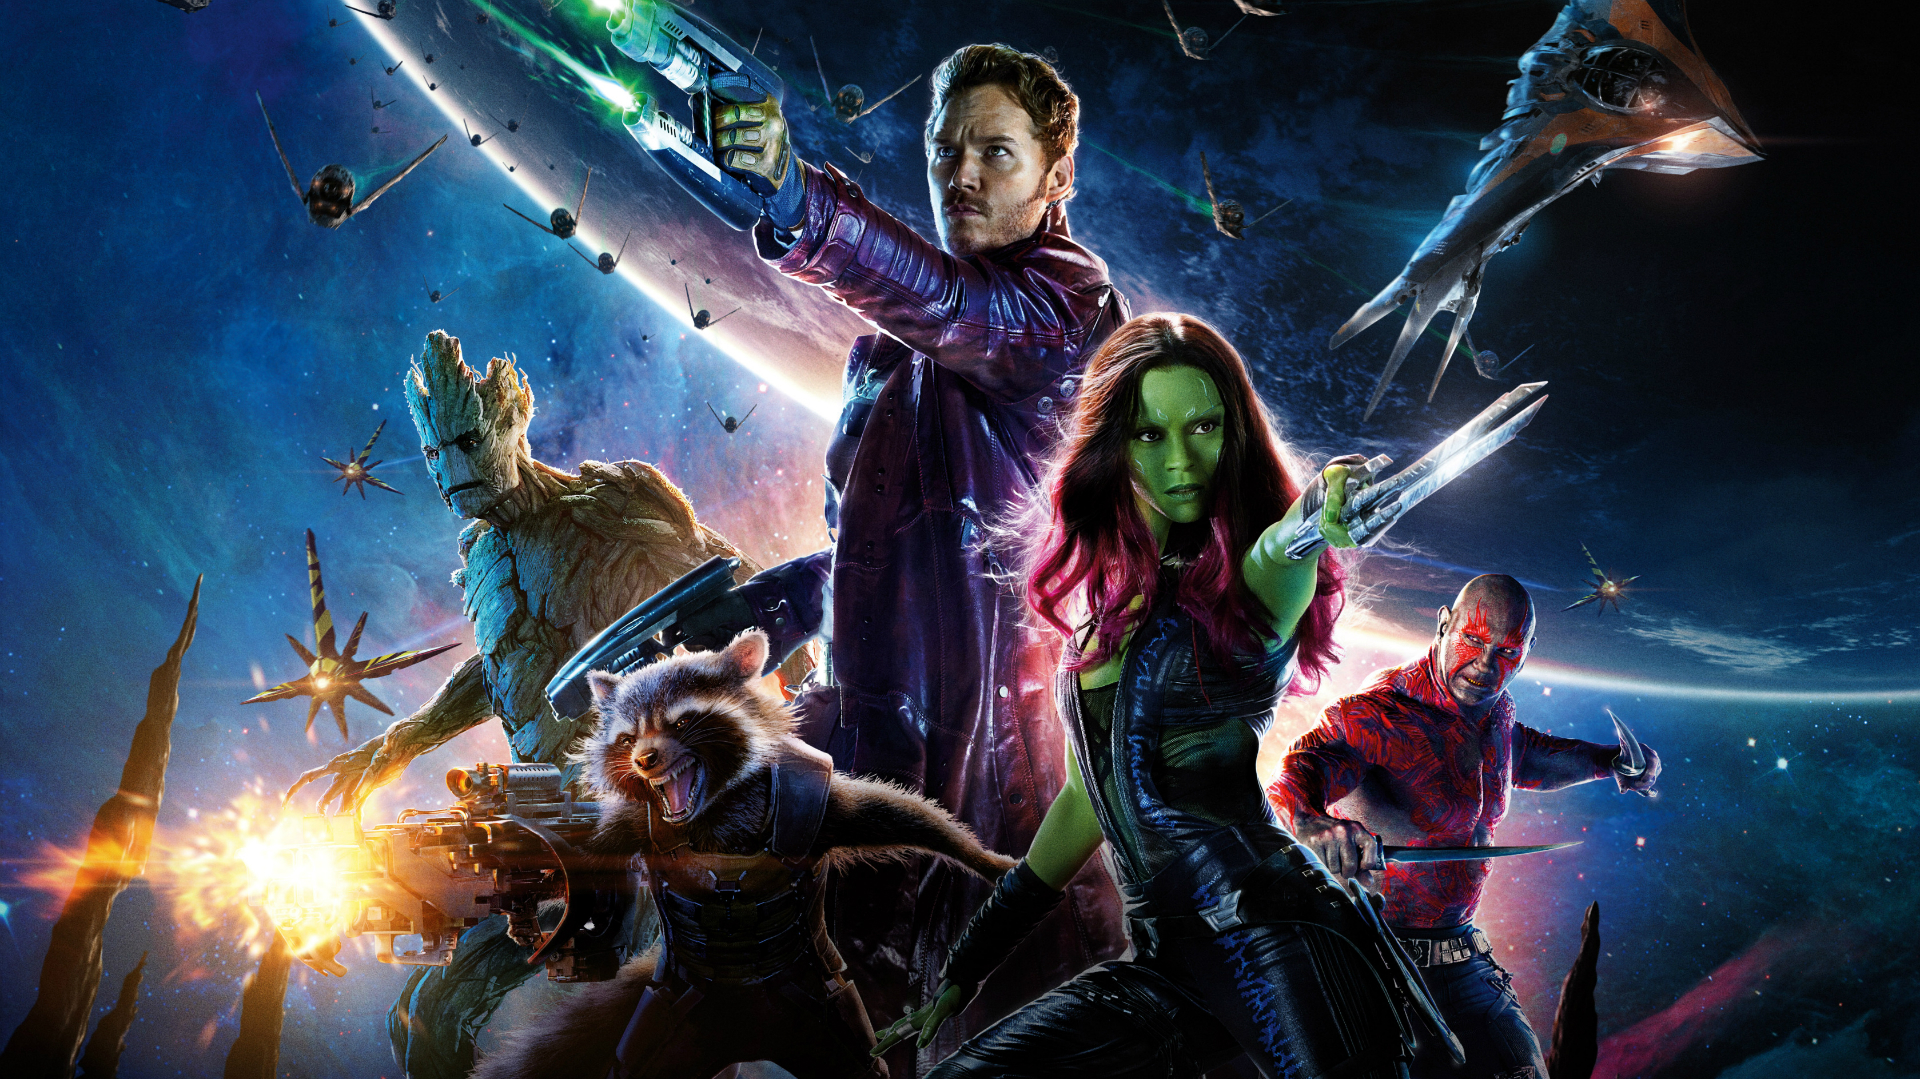 Guardians of the Galaxy 3 will end the trilogy